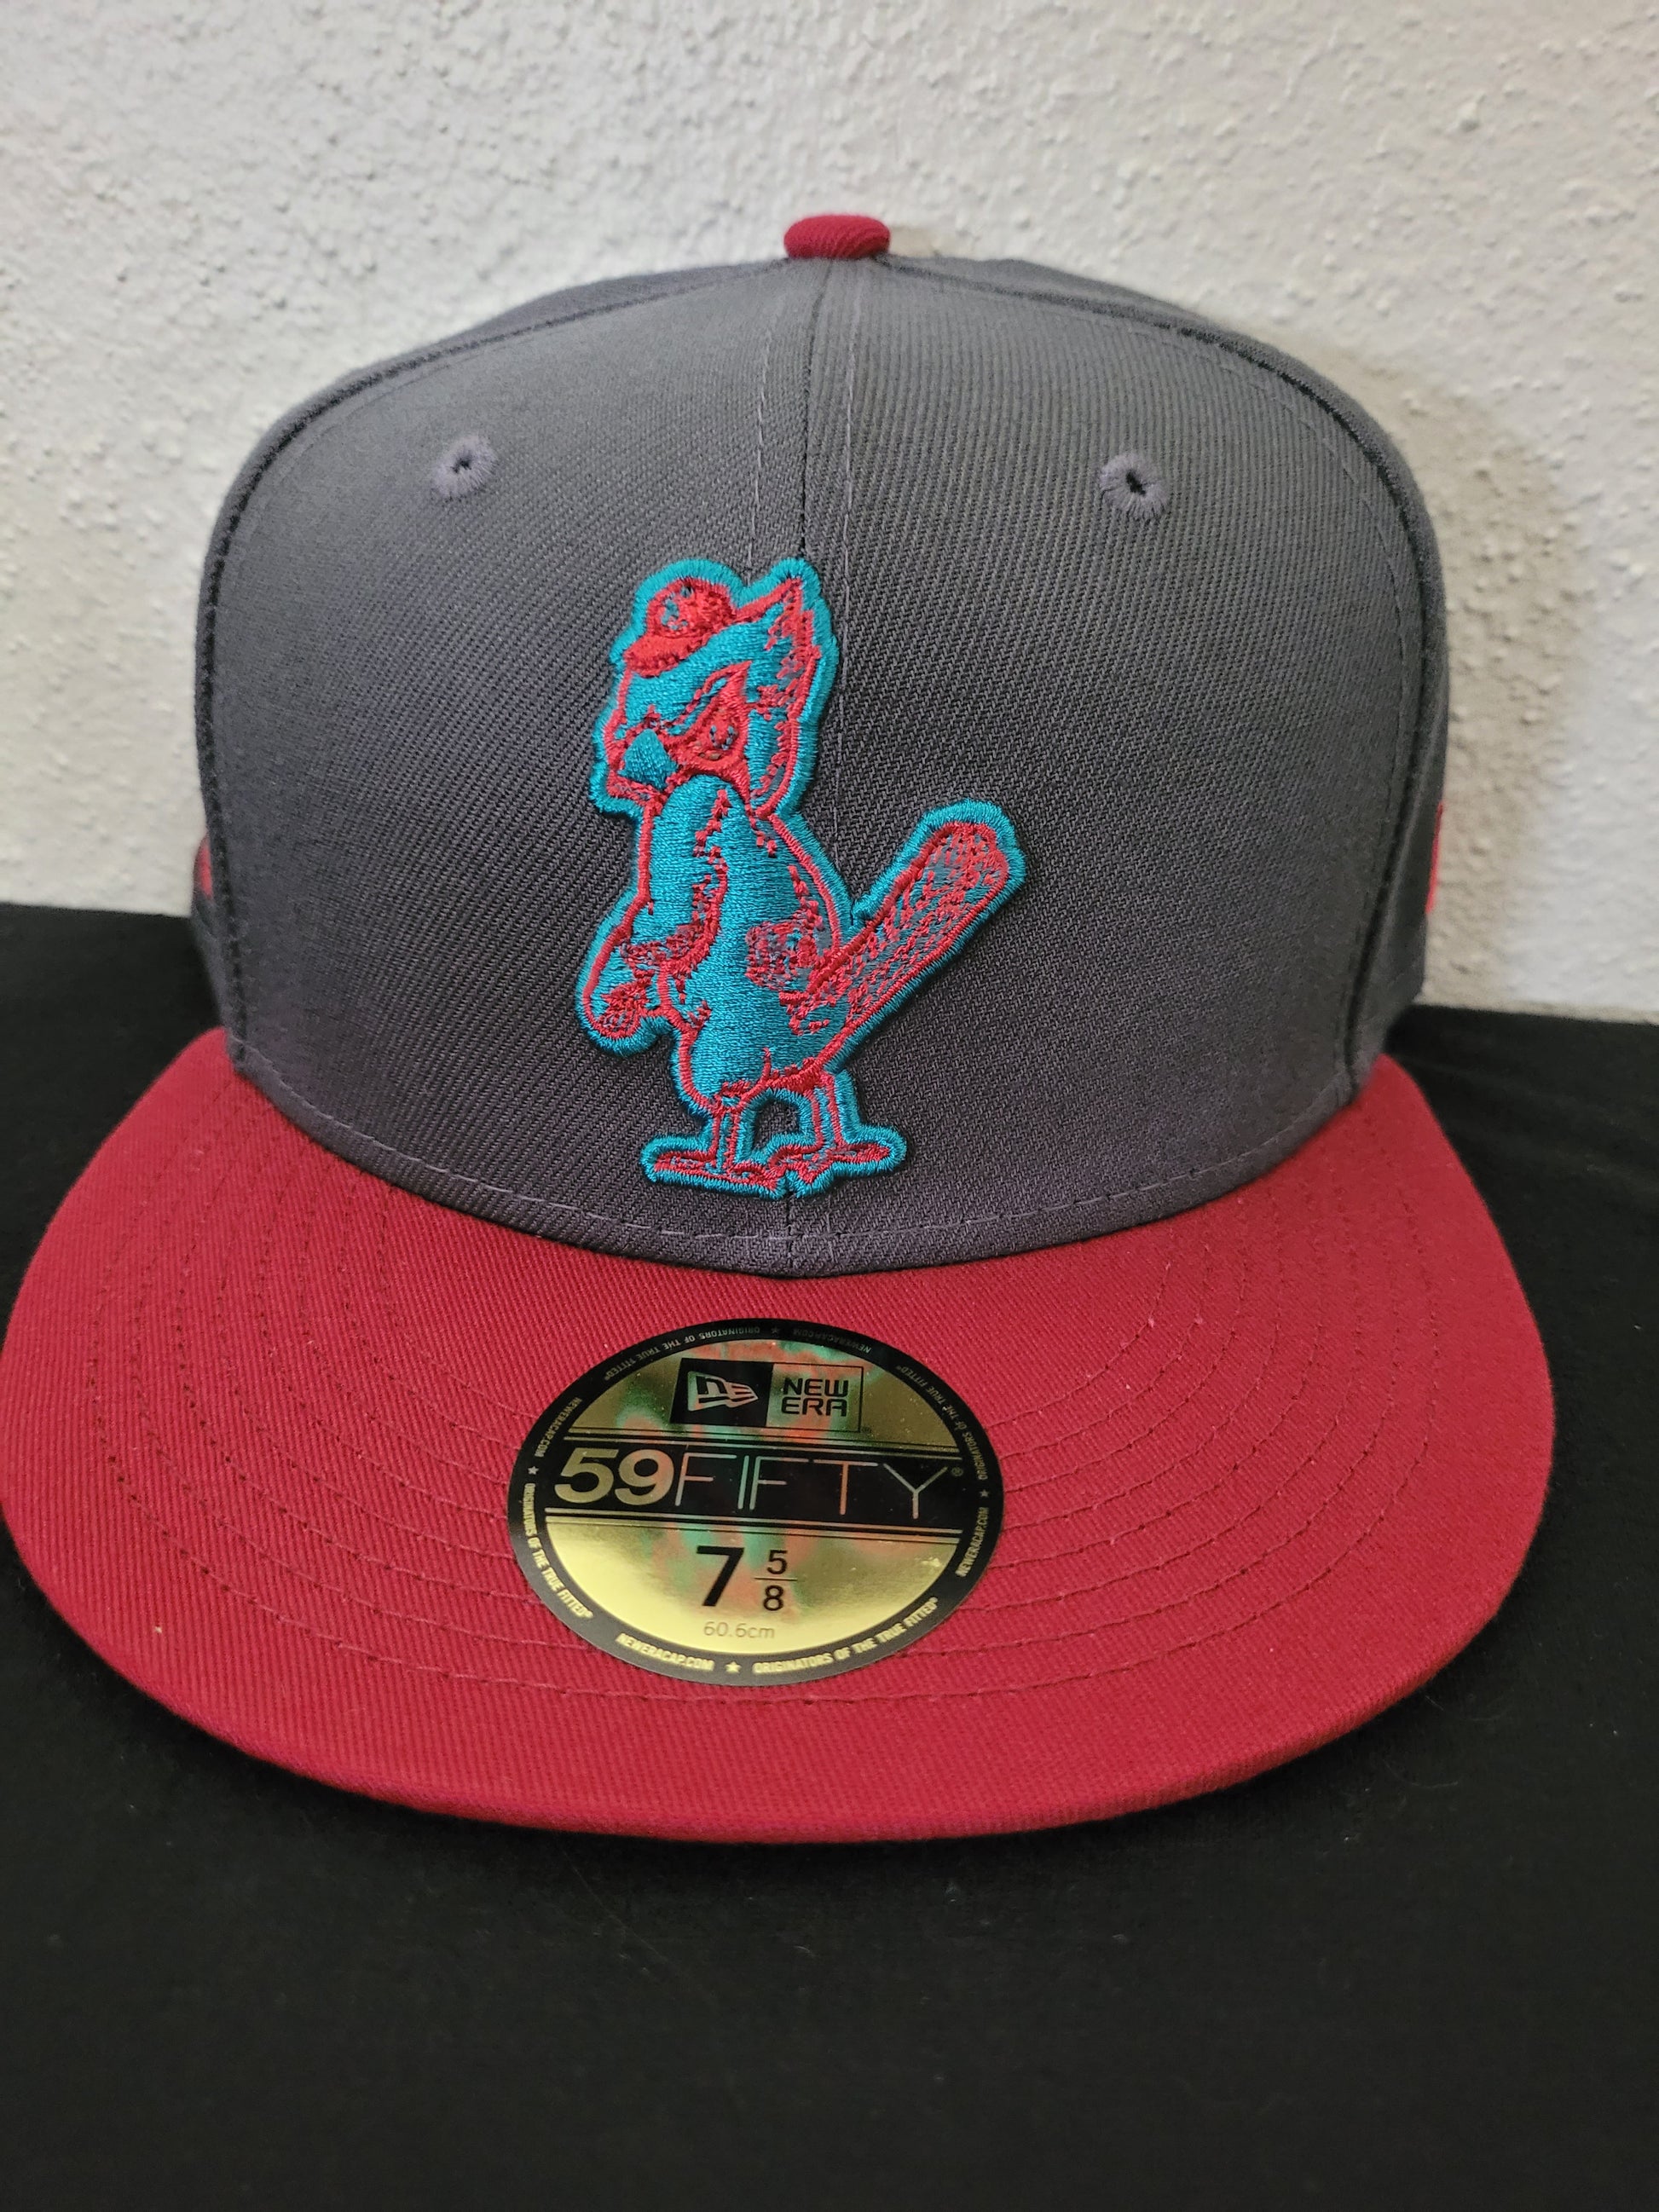 Lids St. Louis Cardinals New Era Chrome 59FIFTY Fitted Hat - Stone/Black